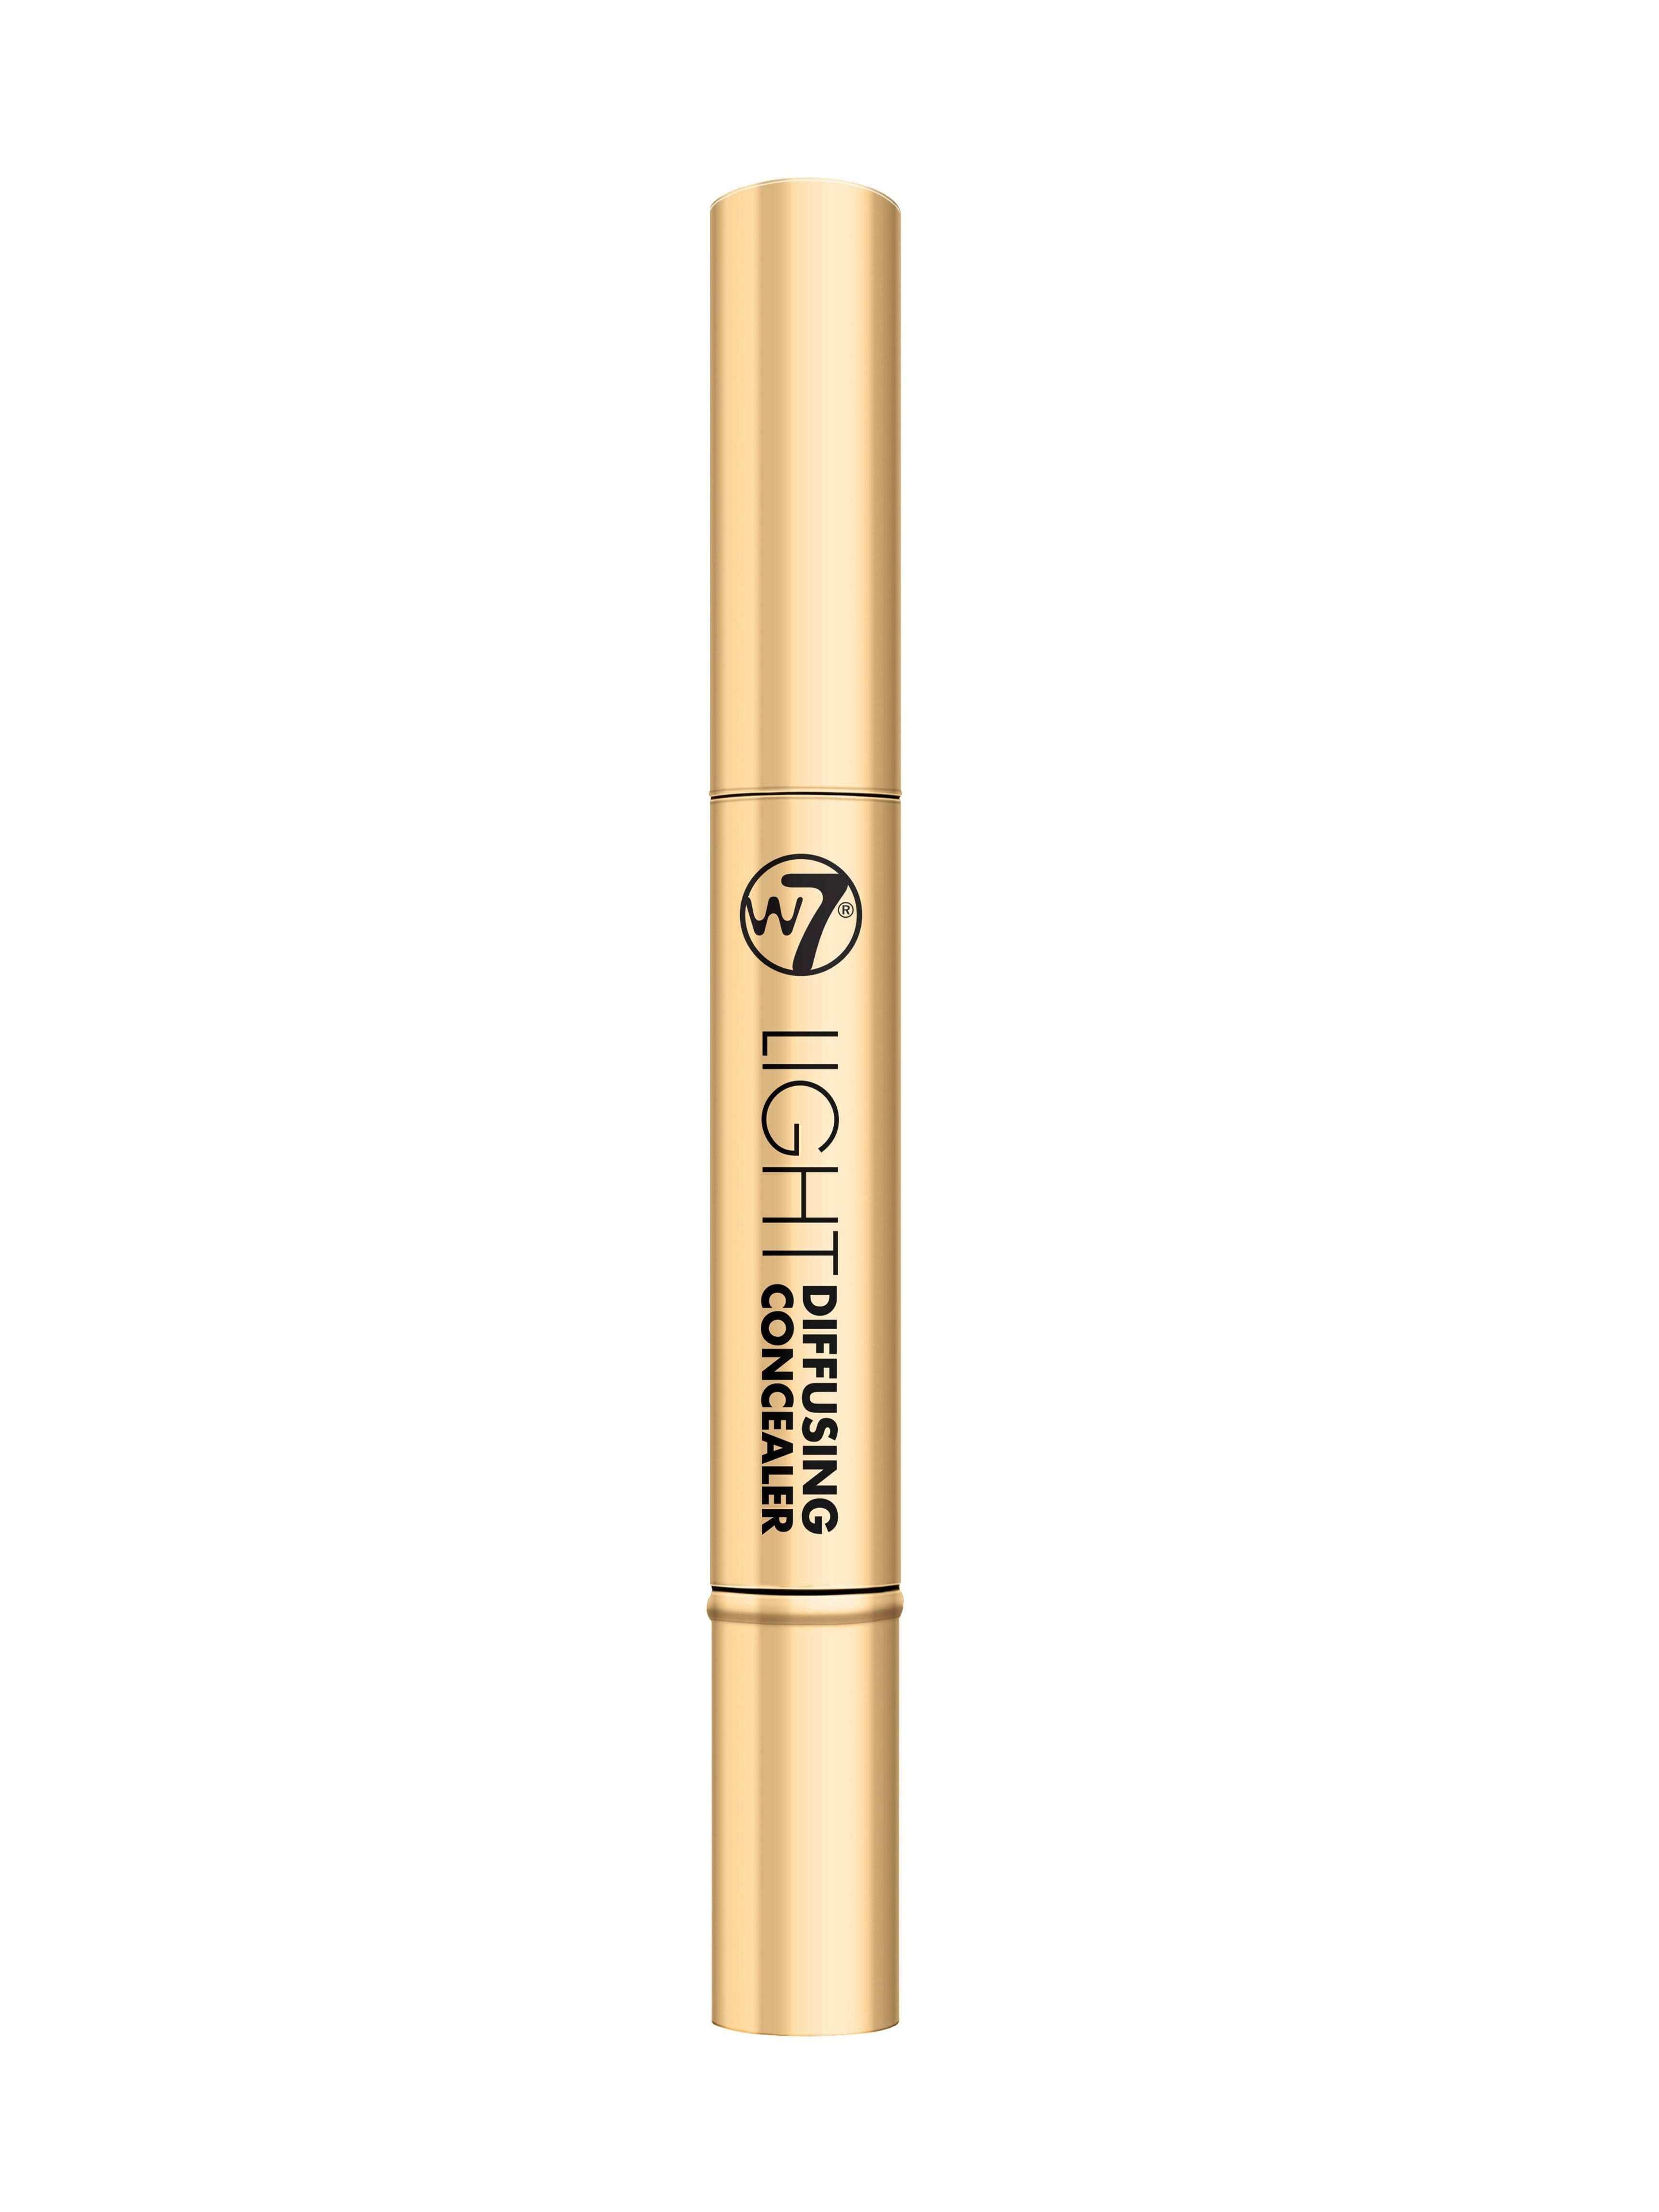 vente rulle middag W7 New and Improved Light Diffusing Concealer - W7 Makeup